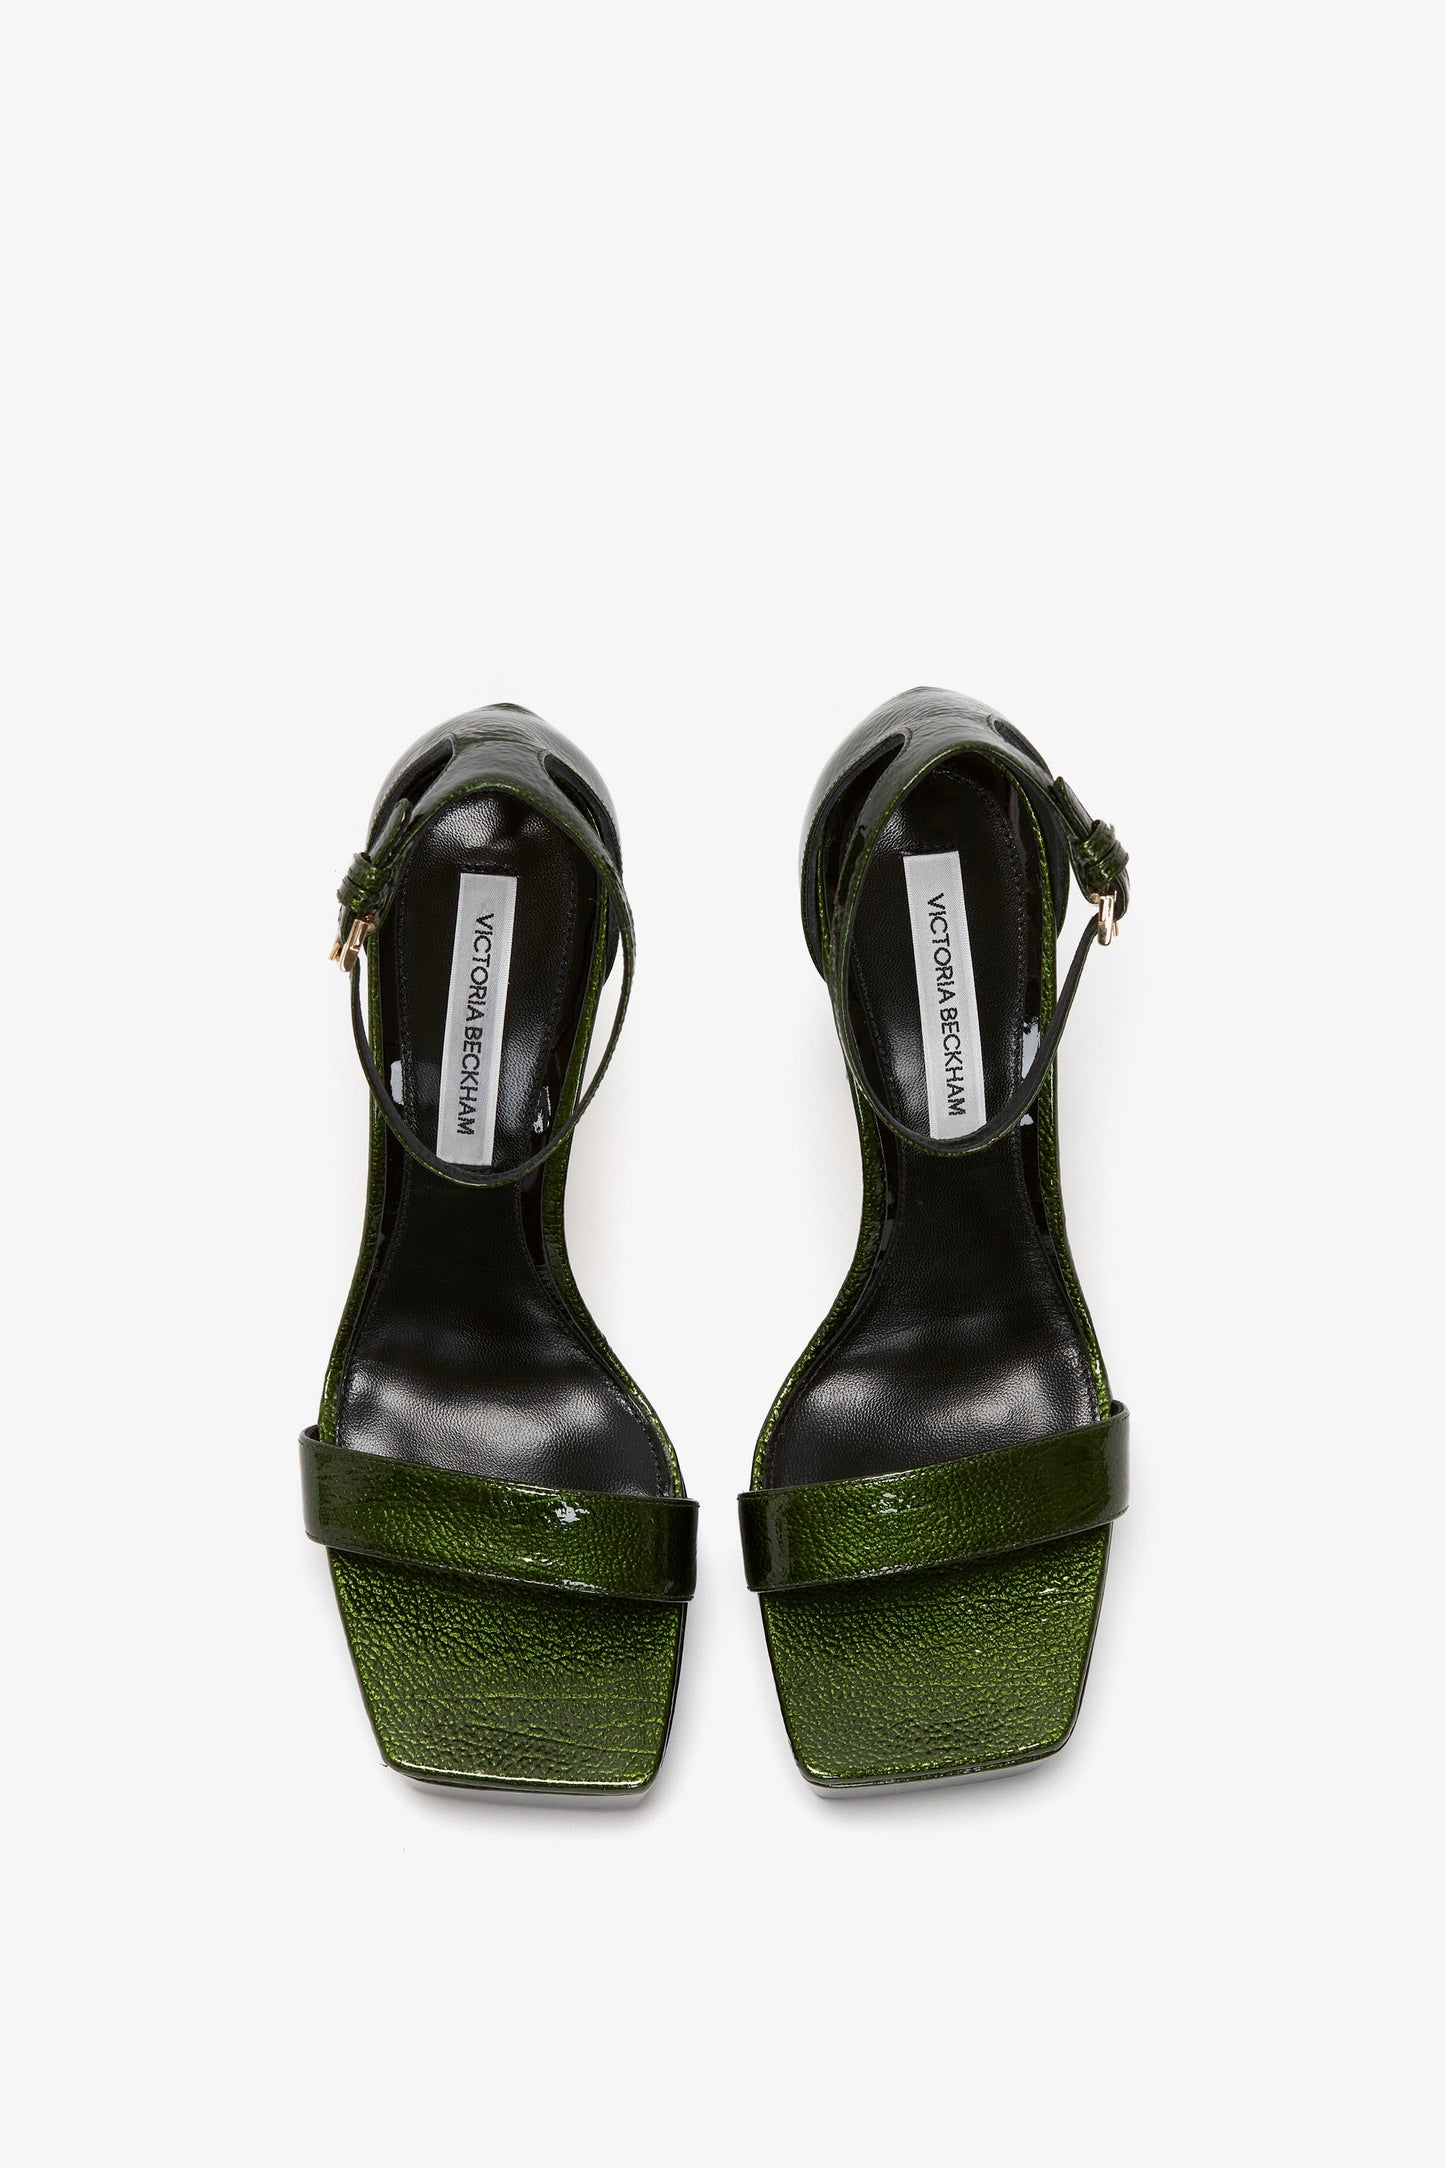 Squared Toe Platform Sandal in Green Grained Patent